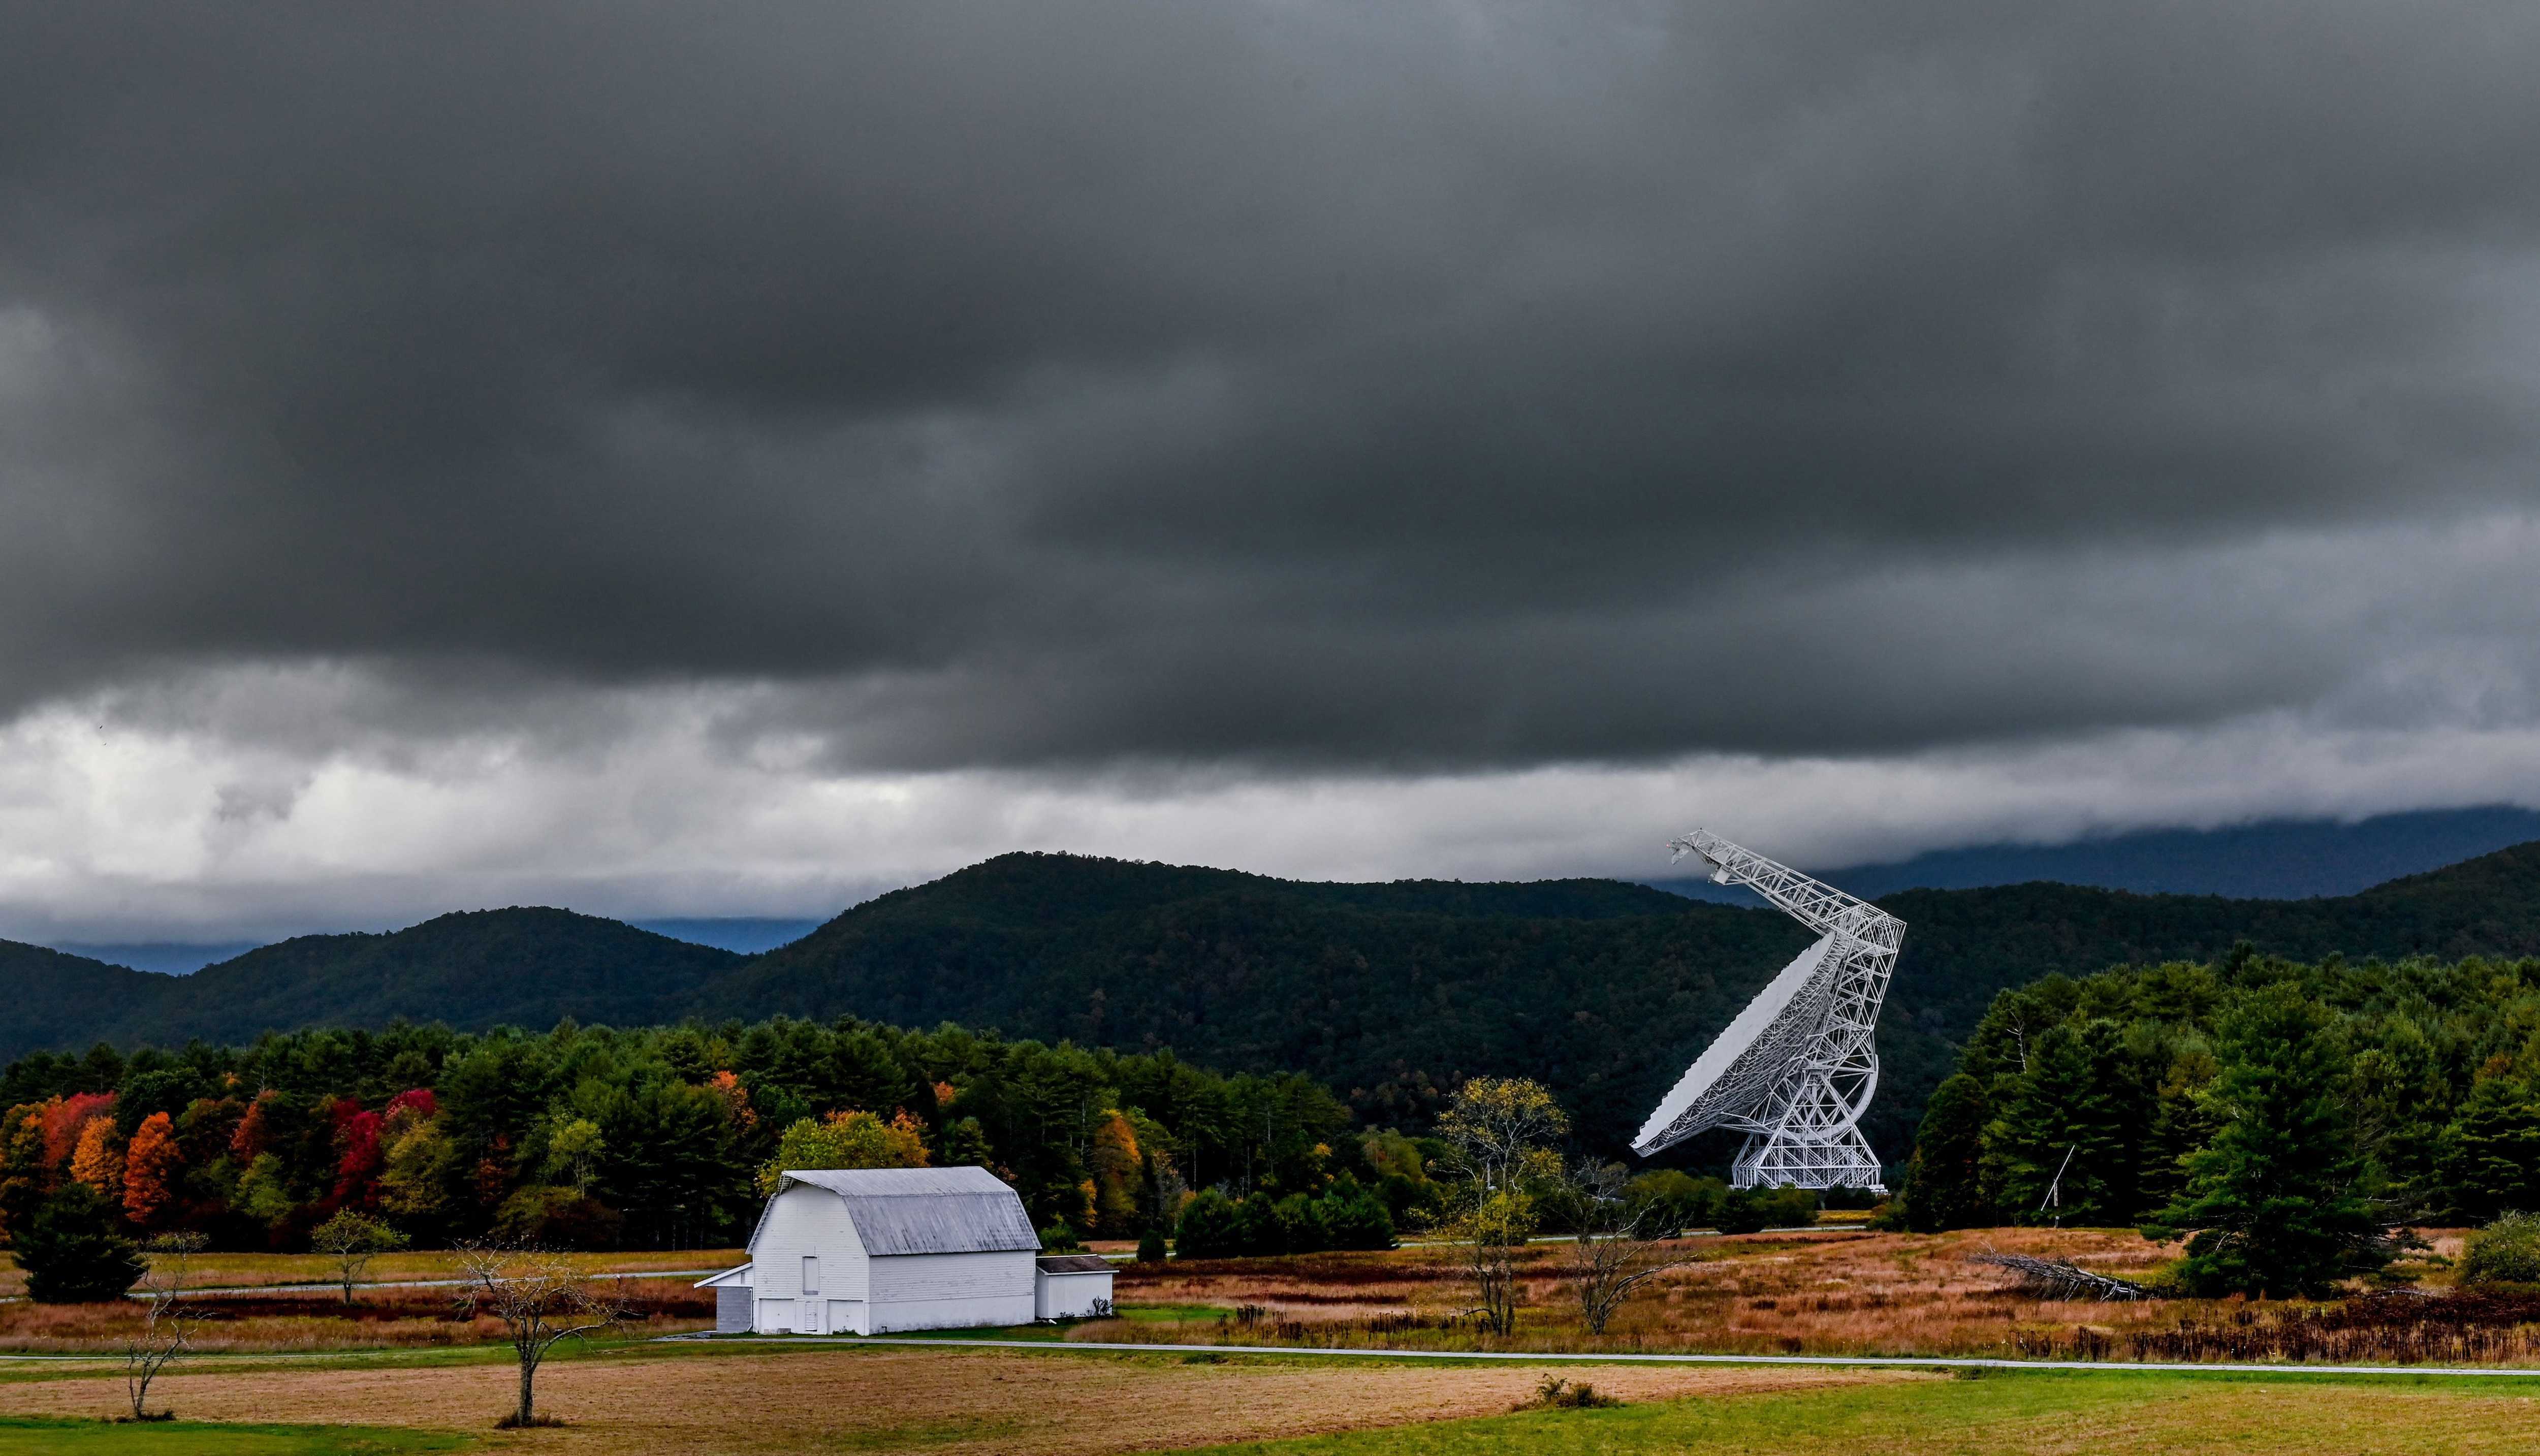 The Green Bank Telescope at the Green Bank Observatory in West Virginia is wider than two football fields and taller than the Statue of Liberty.